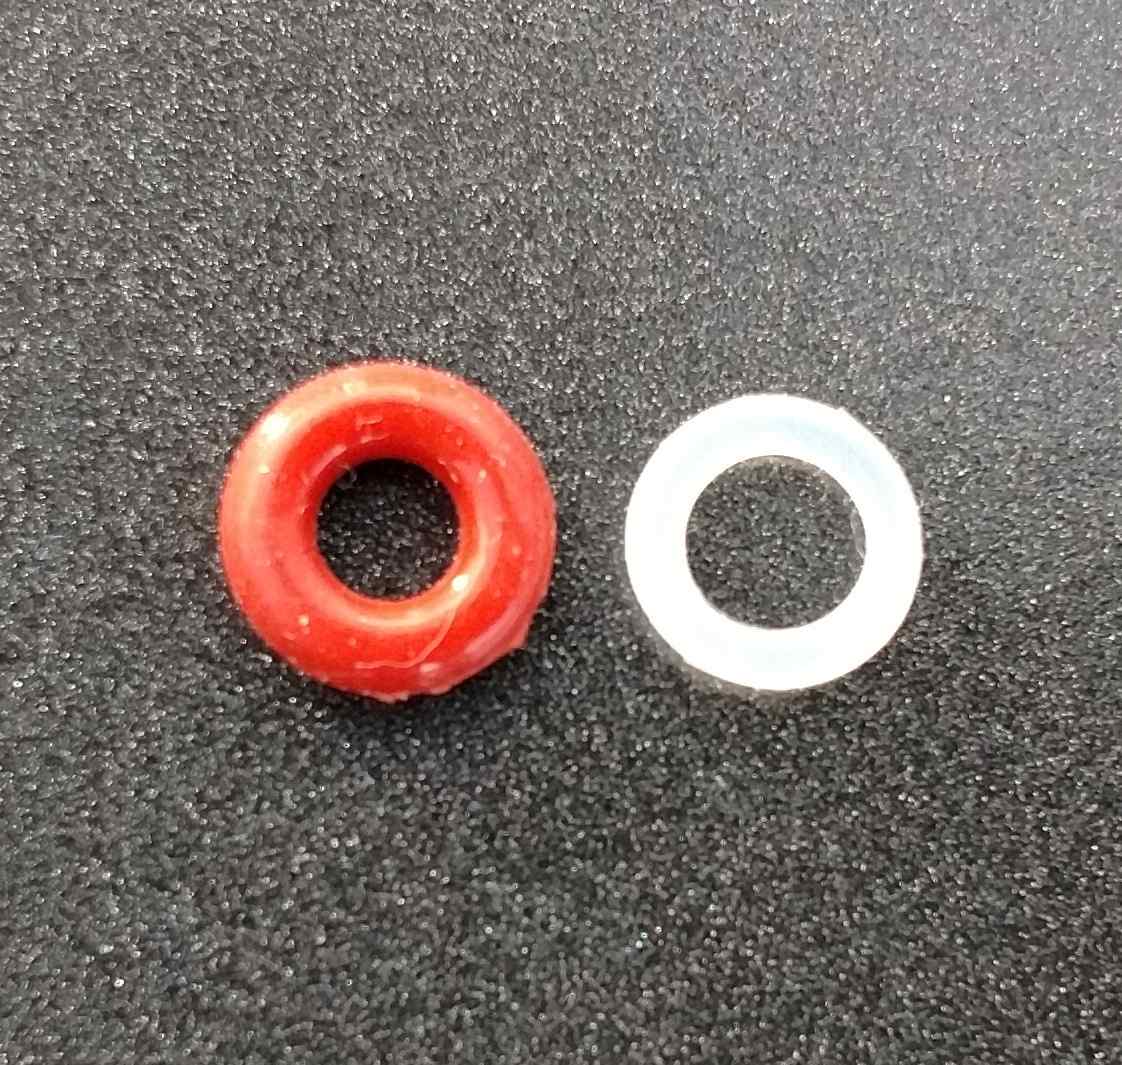 Rubber o-rings with a thickness of 2.5mm and 1.5mm respectively.